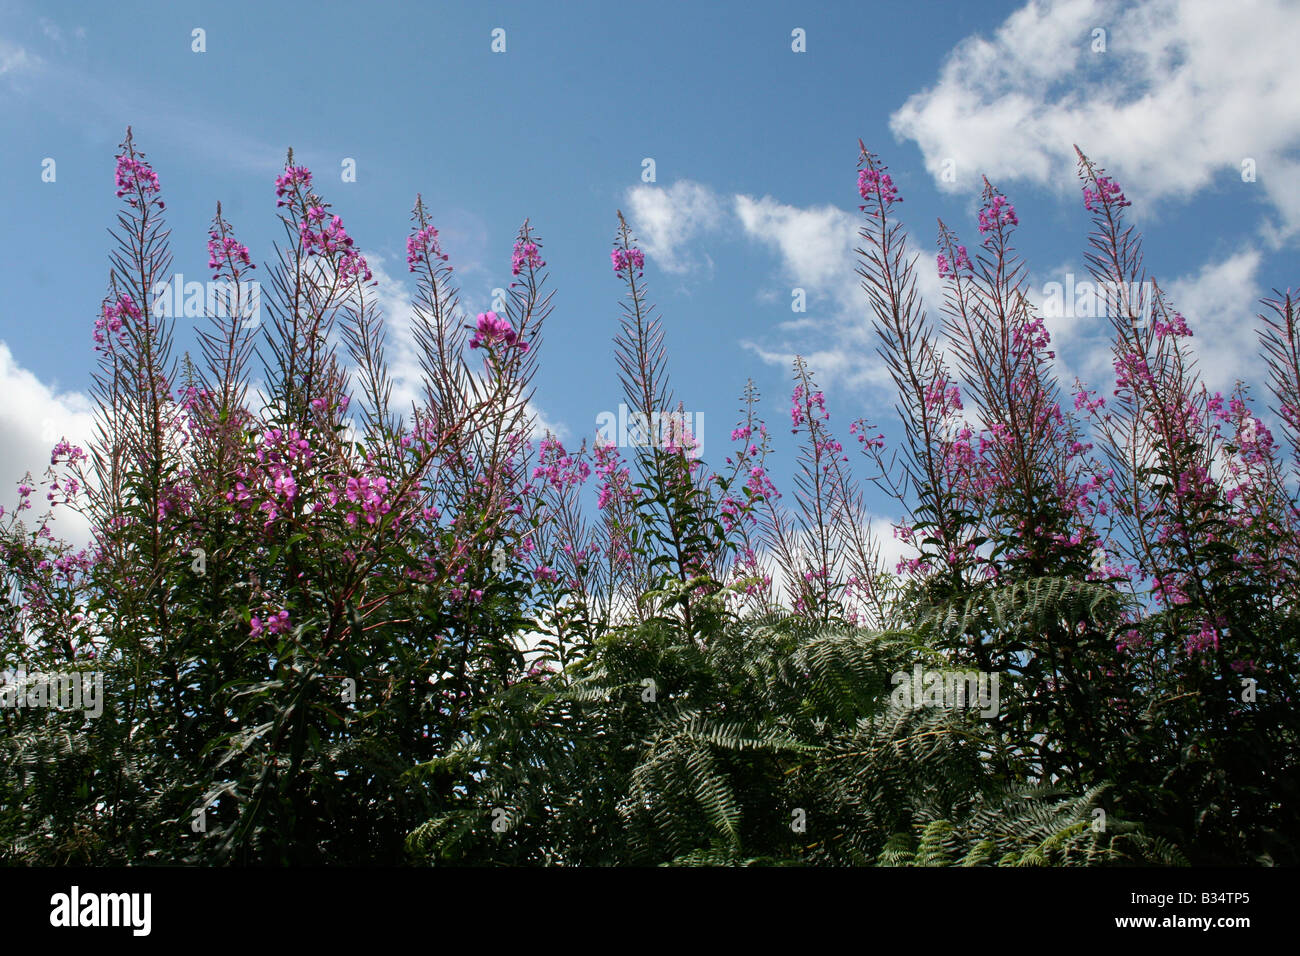 Pink linear wild flowers rising from a hedgerow in the countryside. Stock Photo